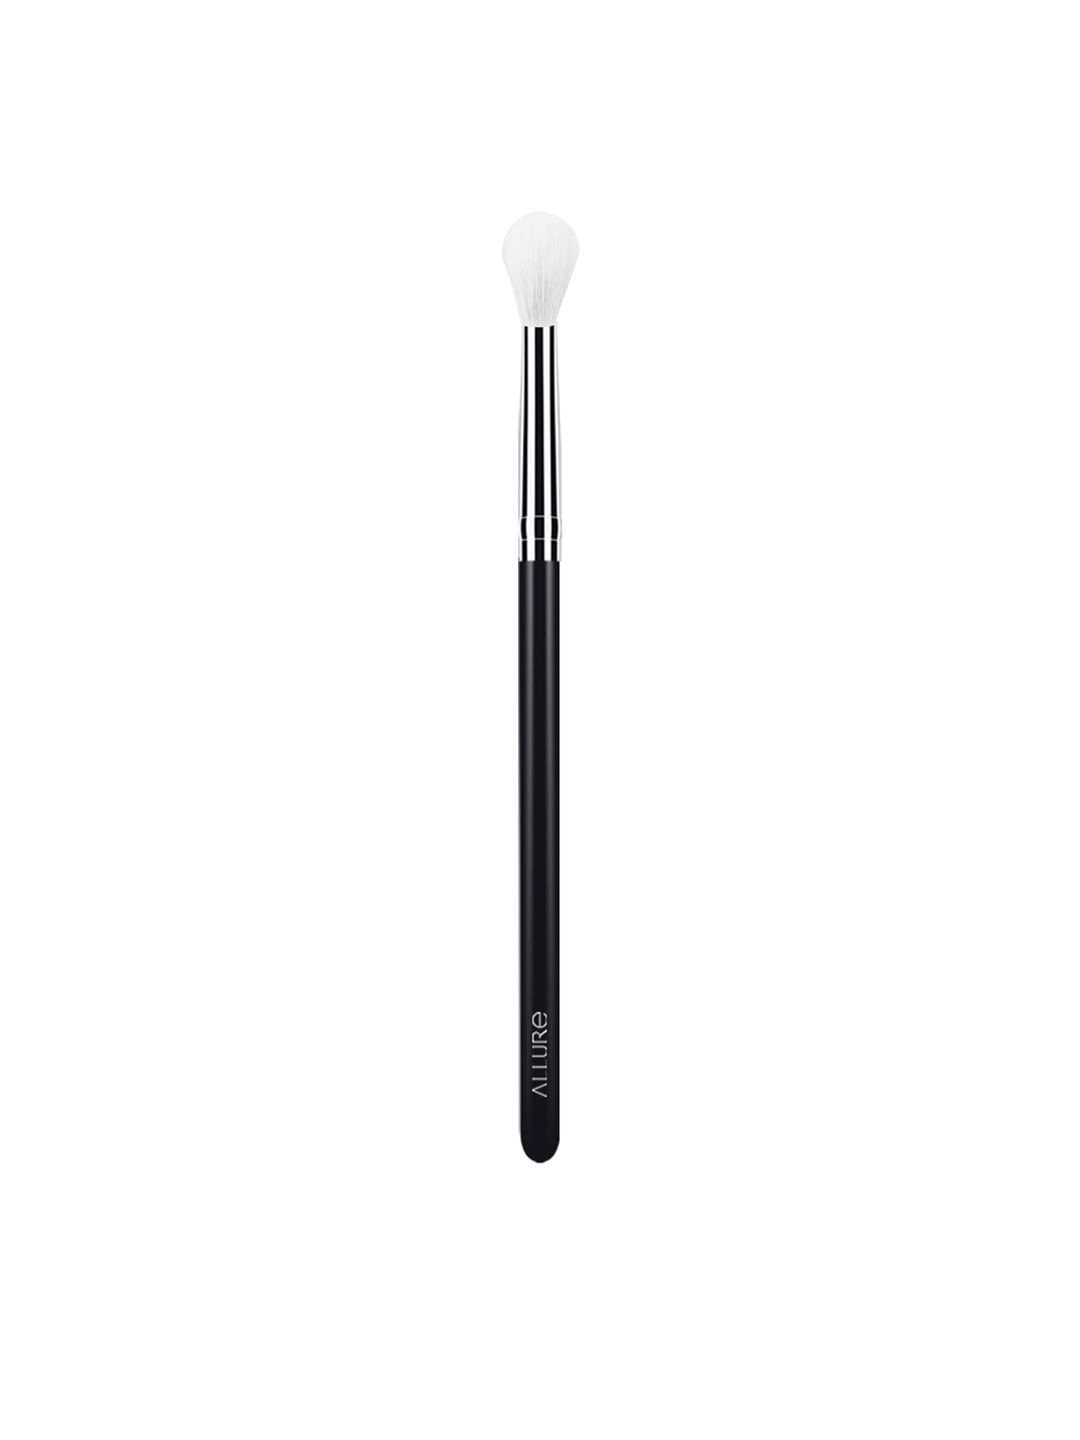 ALLURE Professional Extra Large Blending Eye Makeup Brush SSK-224 Price in India